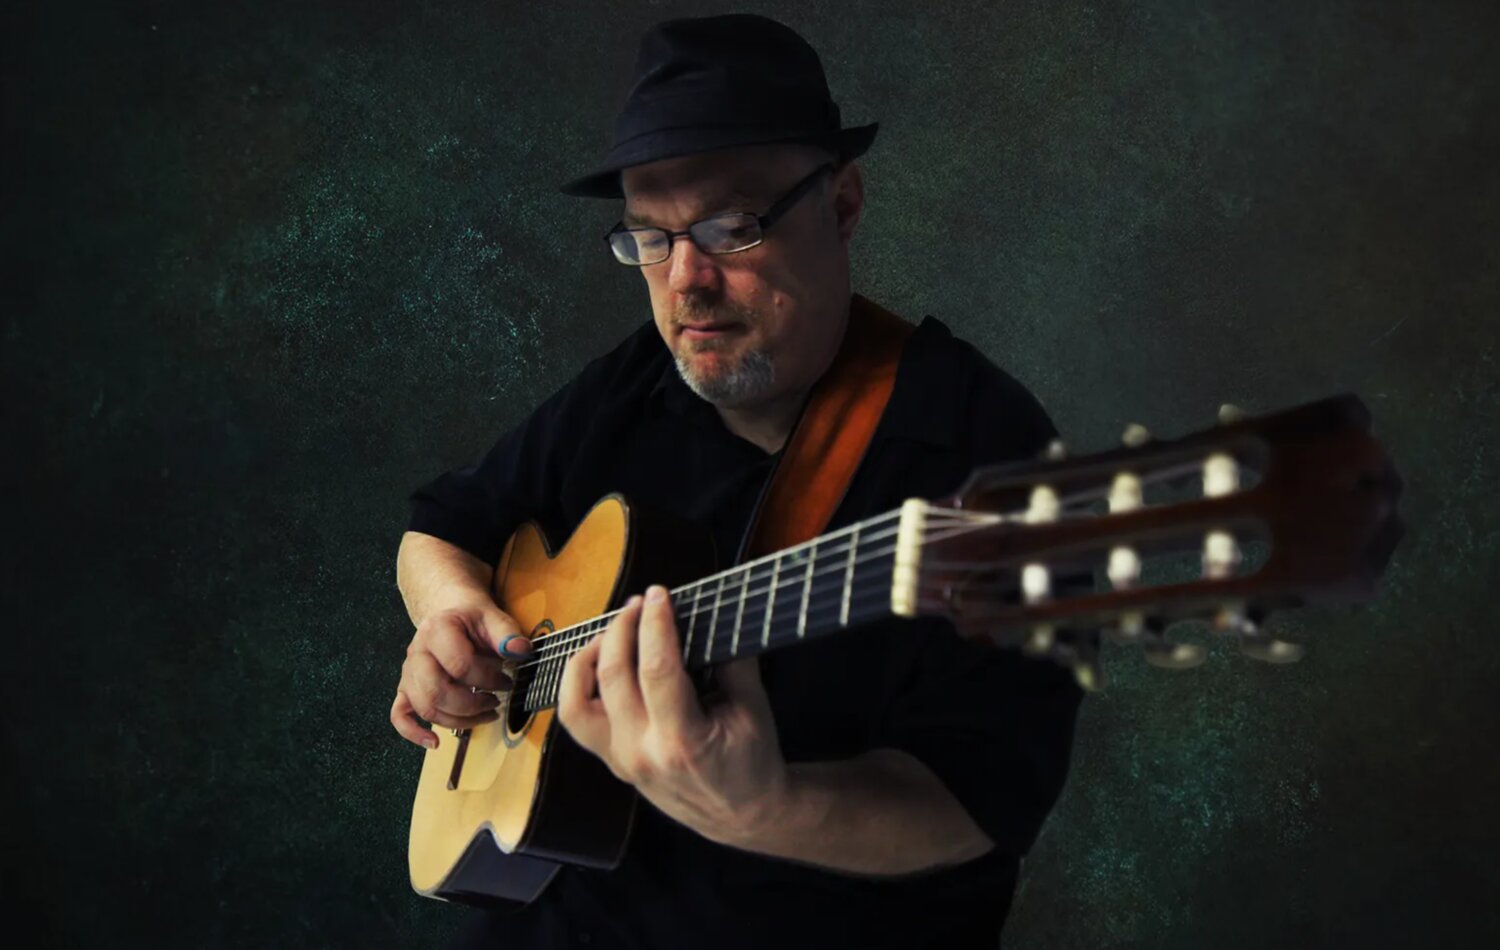 The Washington Acoustic Music Association (WAMA) is hosting a concert and guitar workshop by world-renowned fingerstyle guitarist Richard Smith at the Hope Grange in Winlock. 